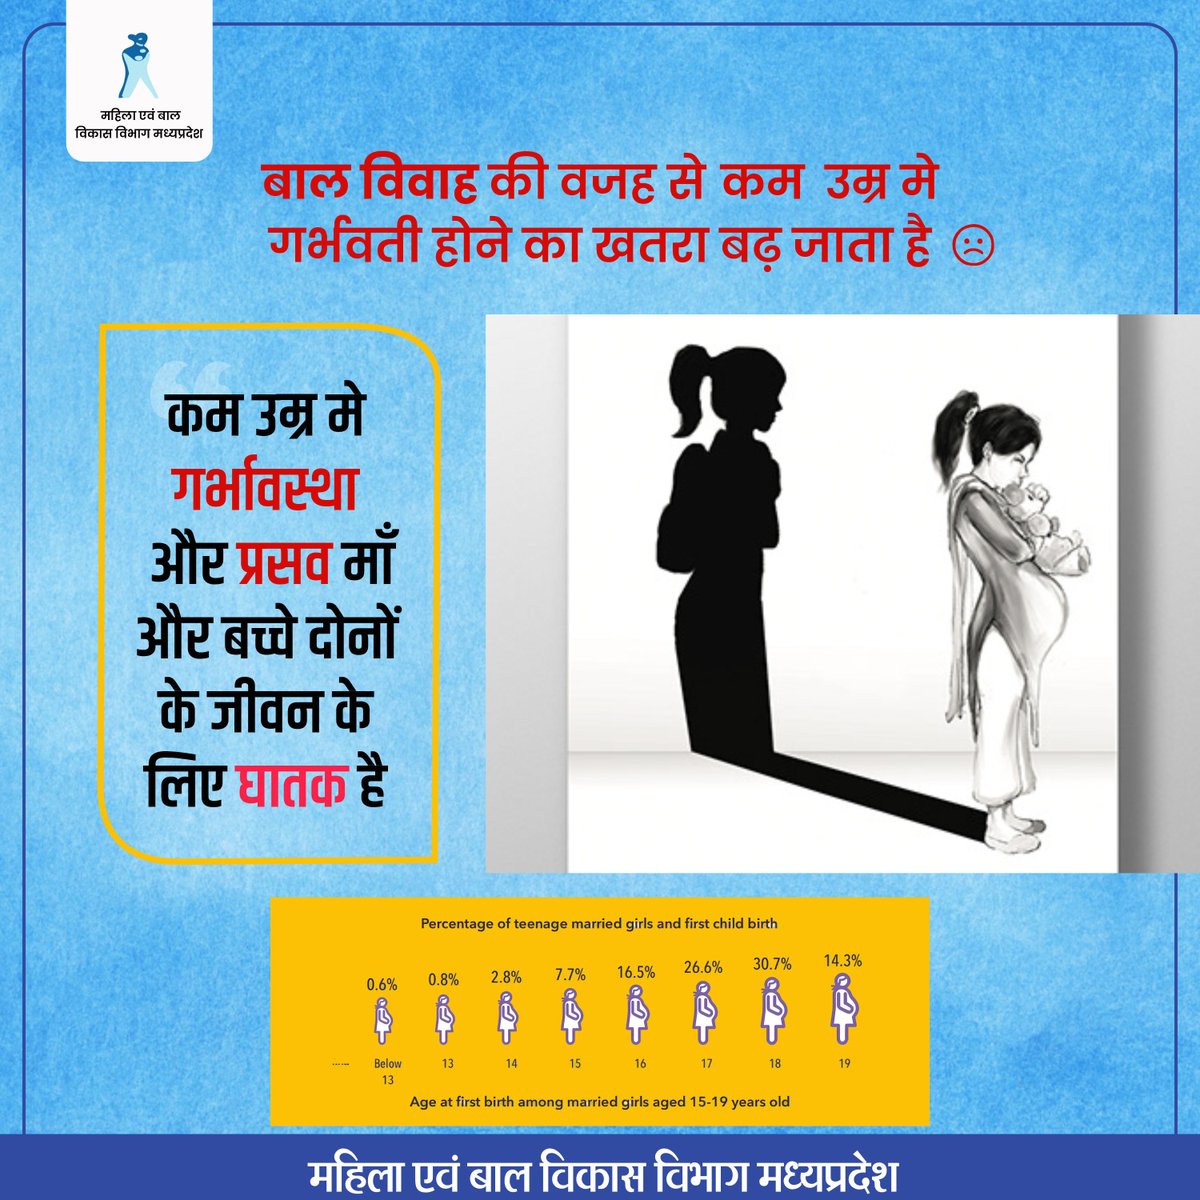 Child marriage has significant effects on health of girls, often leading to serious and long-term consequences, Like
Early Pregnancy and #Childbirth Complications
Maternal Mortality
Mental Health
Reproductive Health & Child Health Issues
#stopchildmarriage
@MinistryWCD